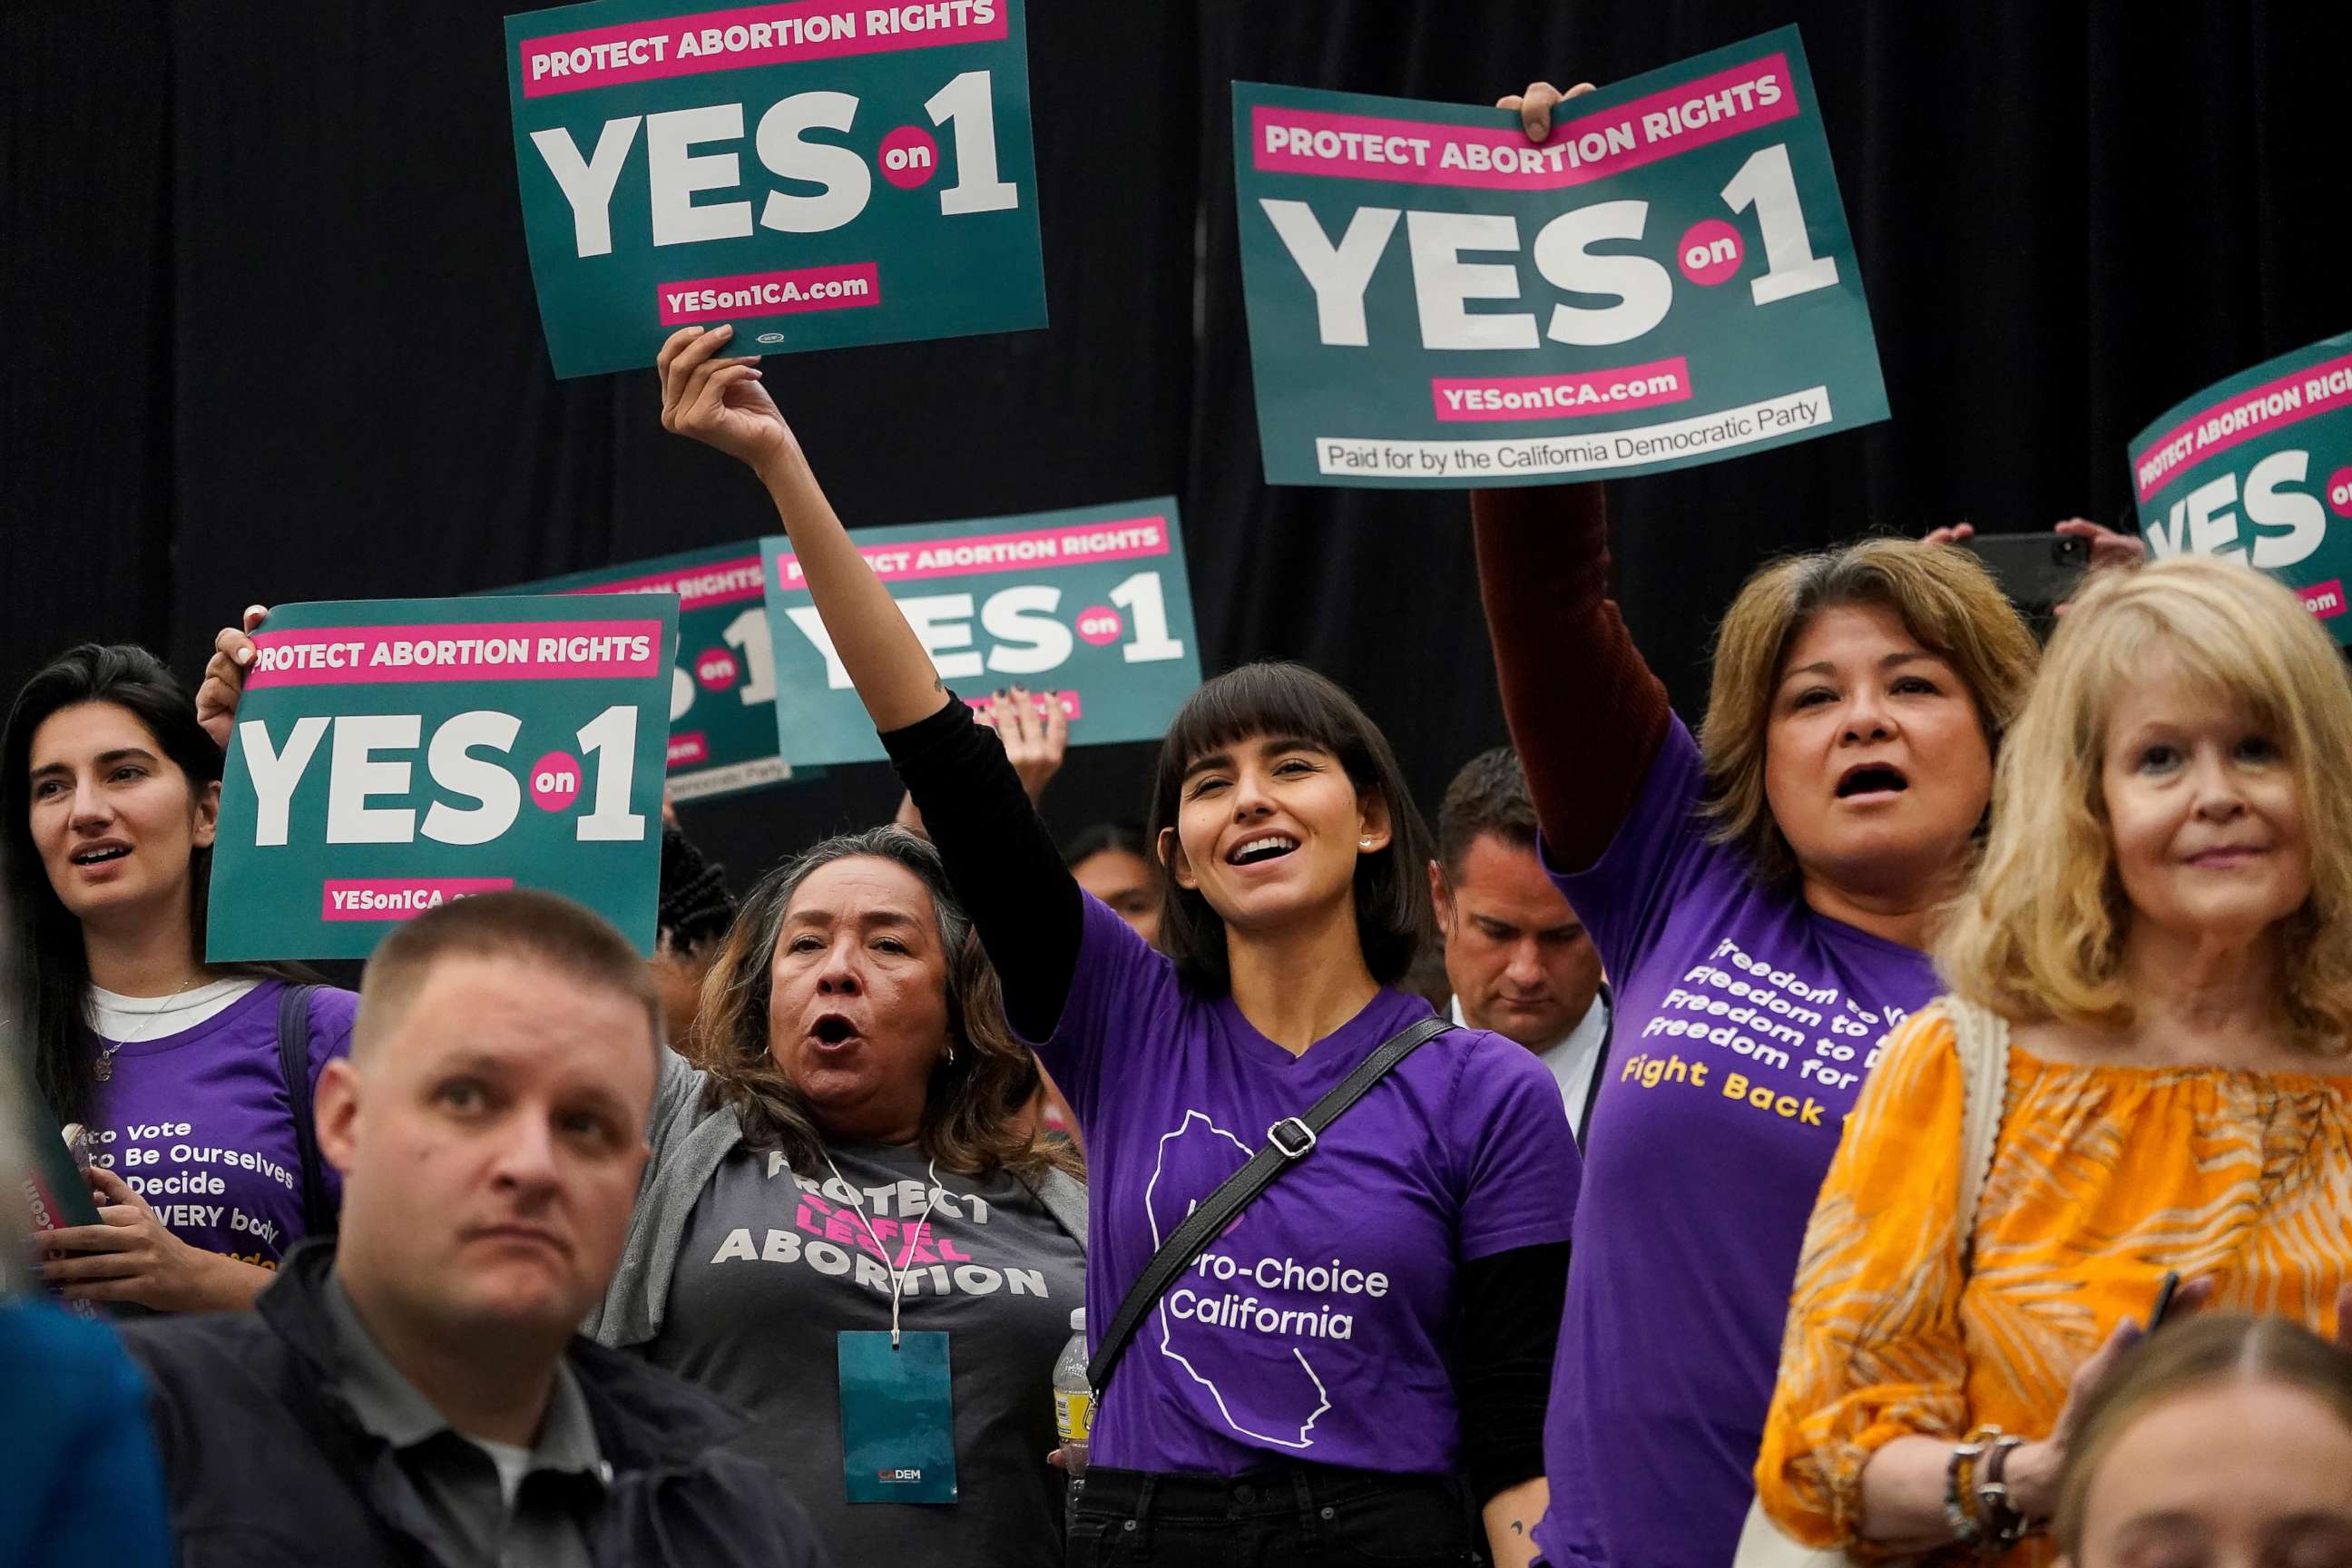 PHOTO: Supporters of the YES on Proposition 1, a state constitutional amendment guaranteeing the right to abortion and contraception, hold a rally at Long Beach City College in Long Beach, Calif., Nov. 6, 2022.